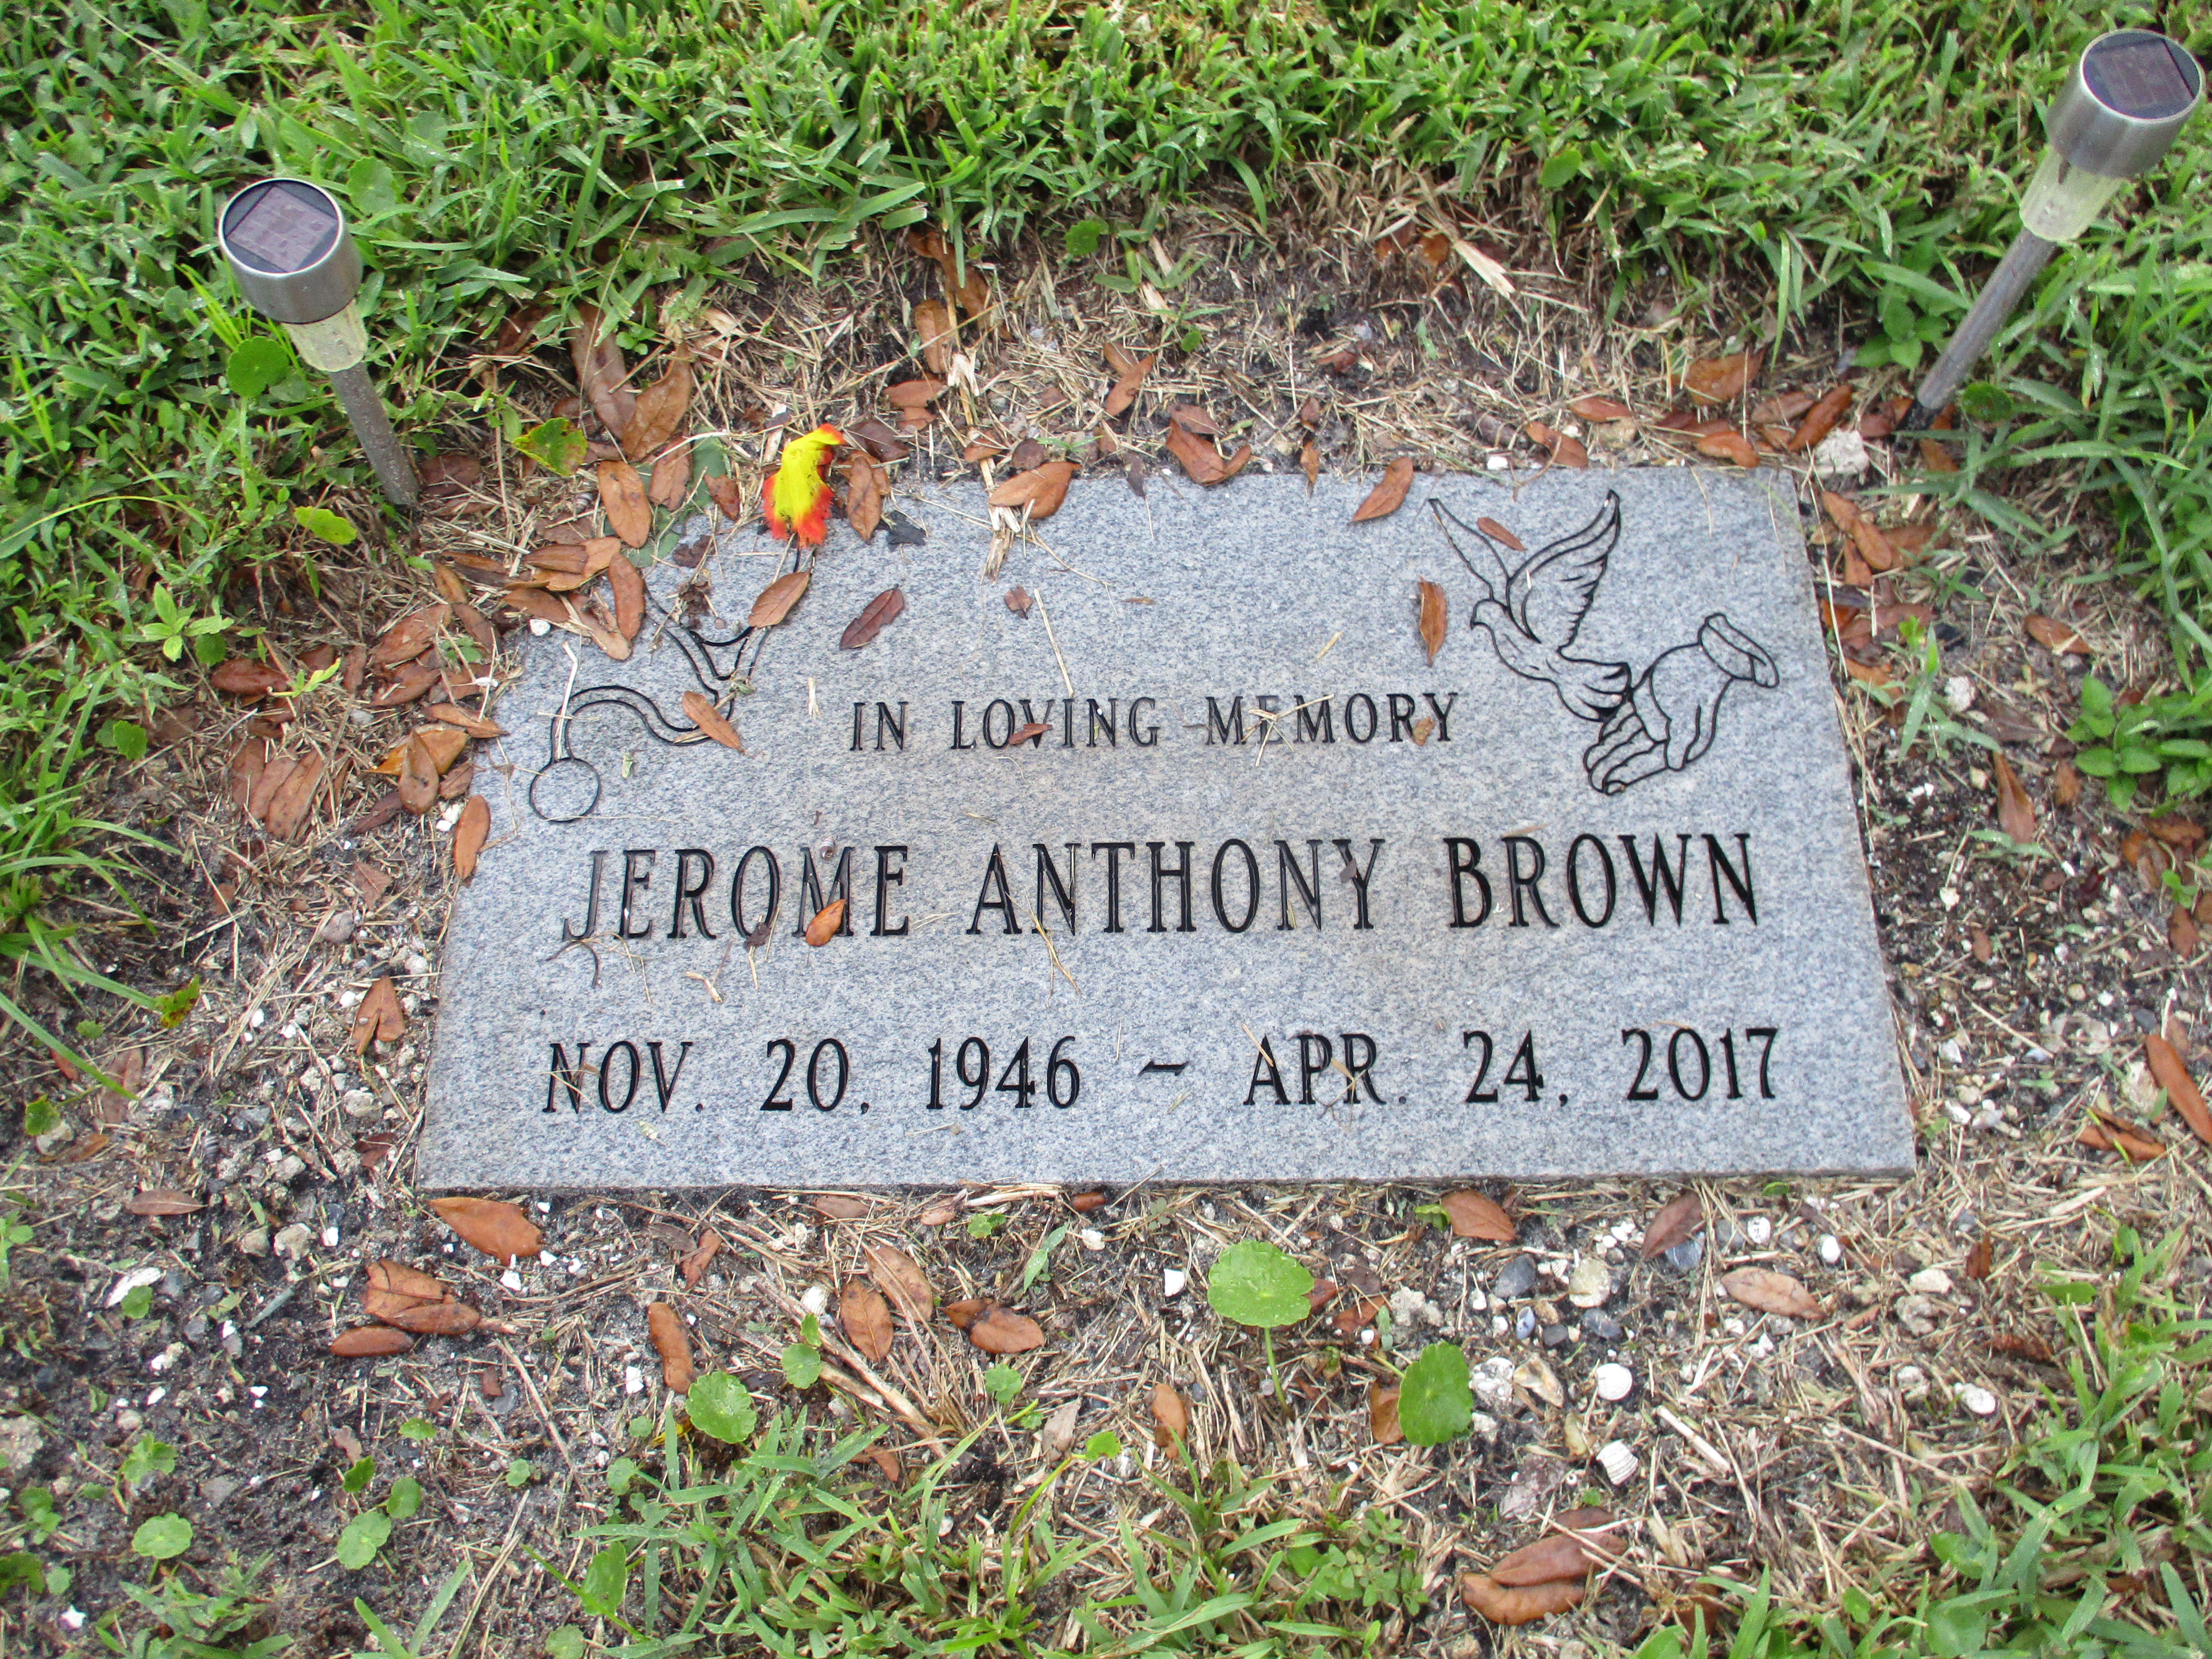 Jerome Anthony Brown